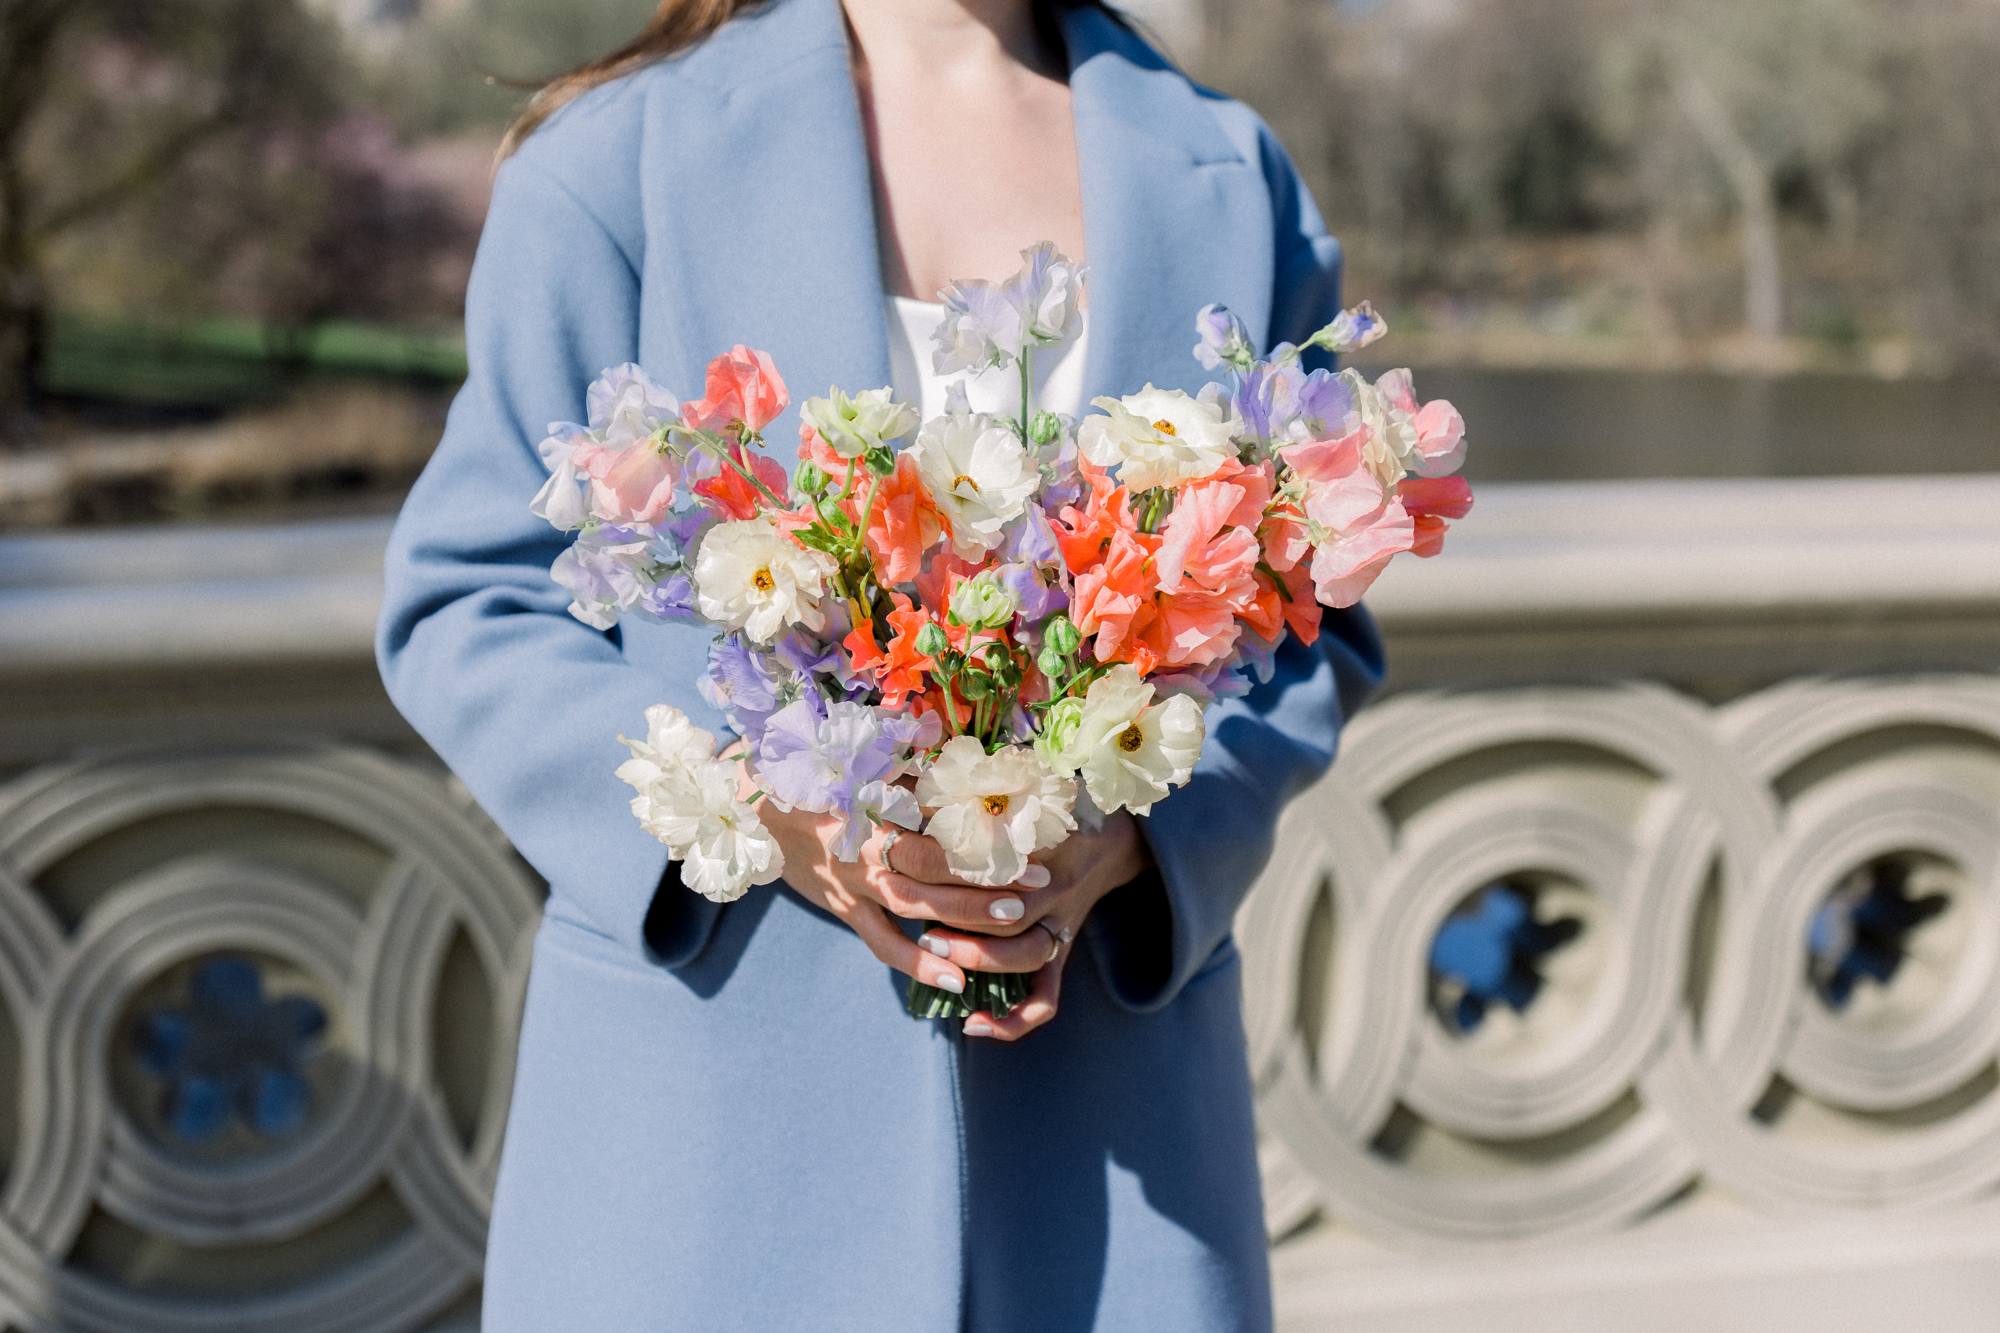 Stylish Spring Bow Bridge Wedding in Central Park Among the Cherry Blossoms